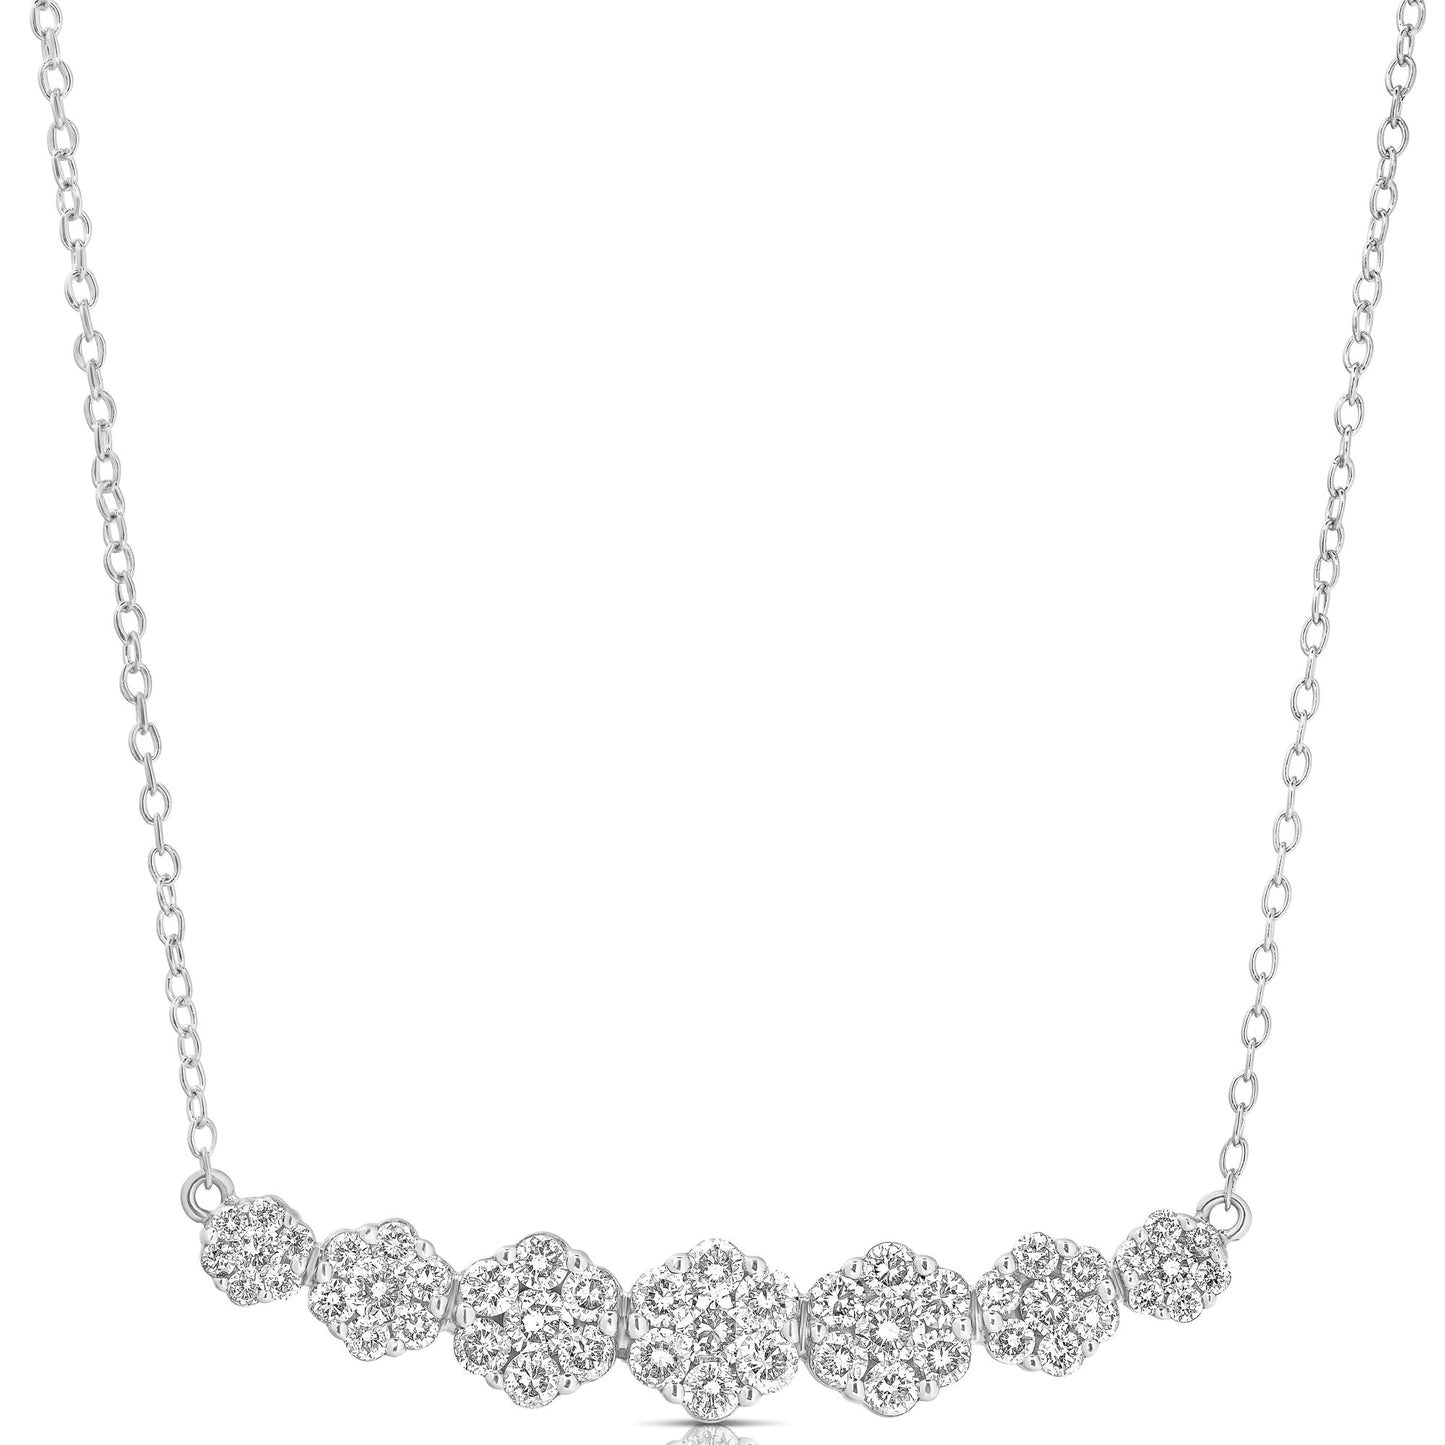 1 Ct 7 Stone Graduating Flower Cluster Necklace